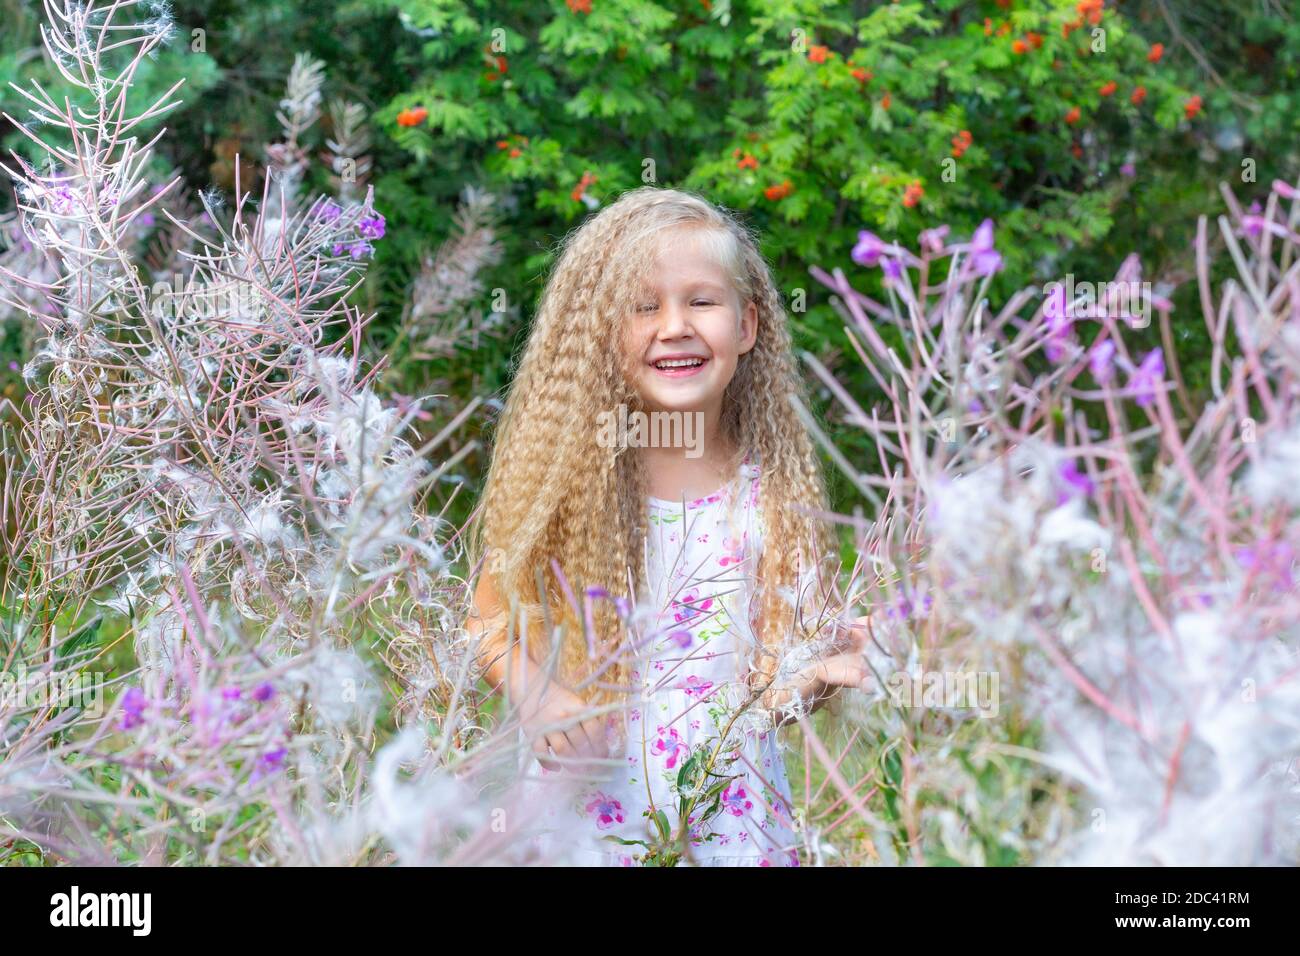 A little blonde girl of 5-6 years old in a white sundress stands surrounded by blooming Sally, fireweed. Long blonde curly hair, hairstyle. Summer, na Stock Photo